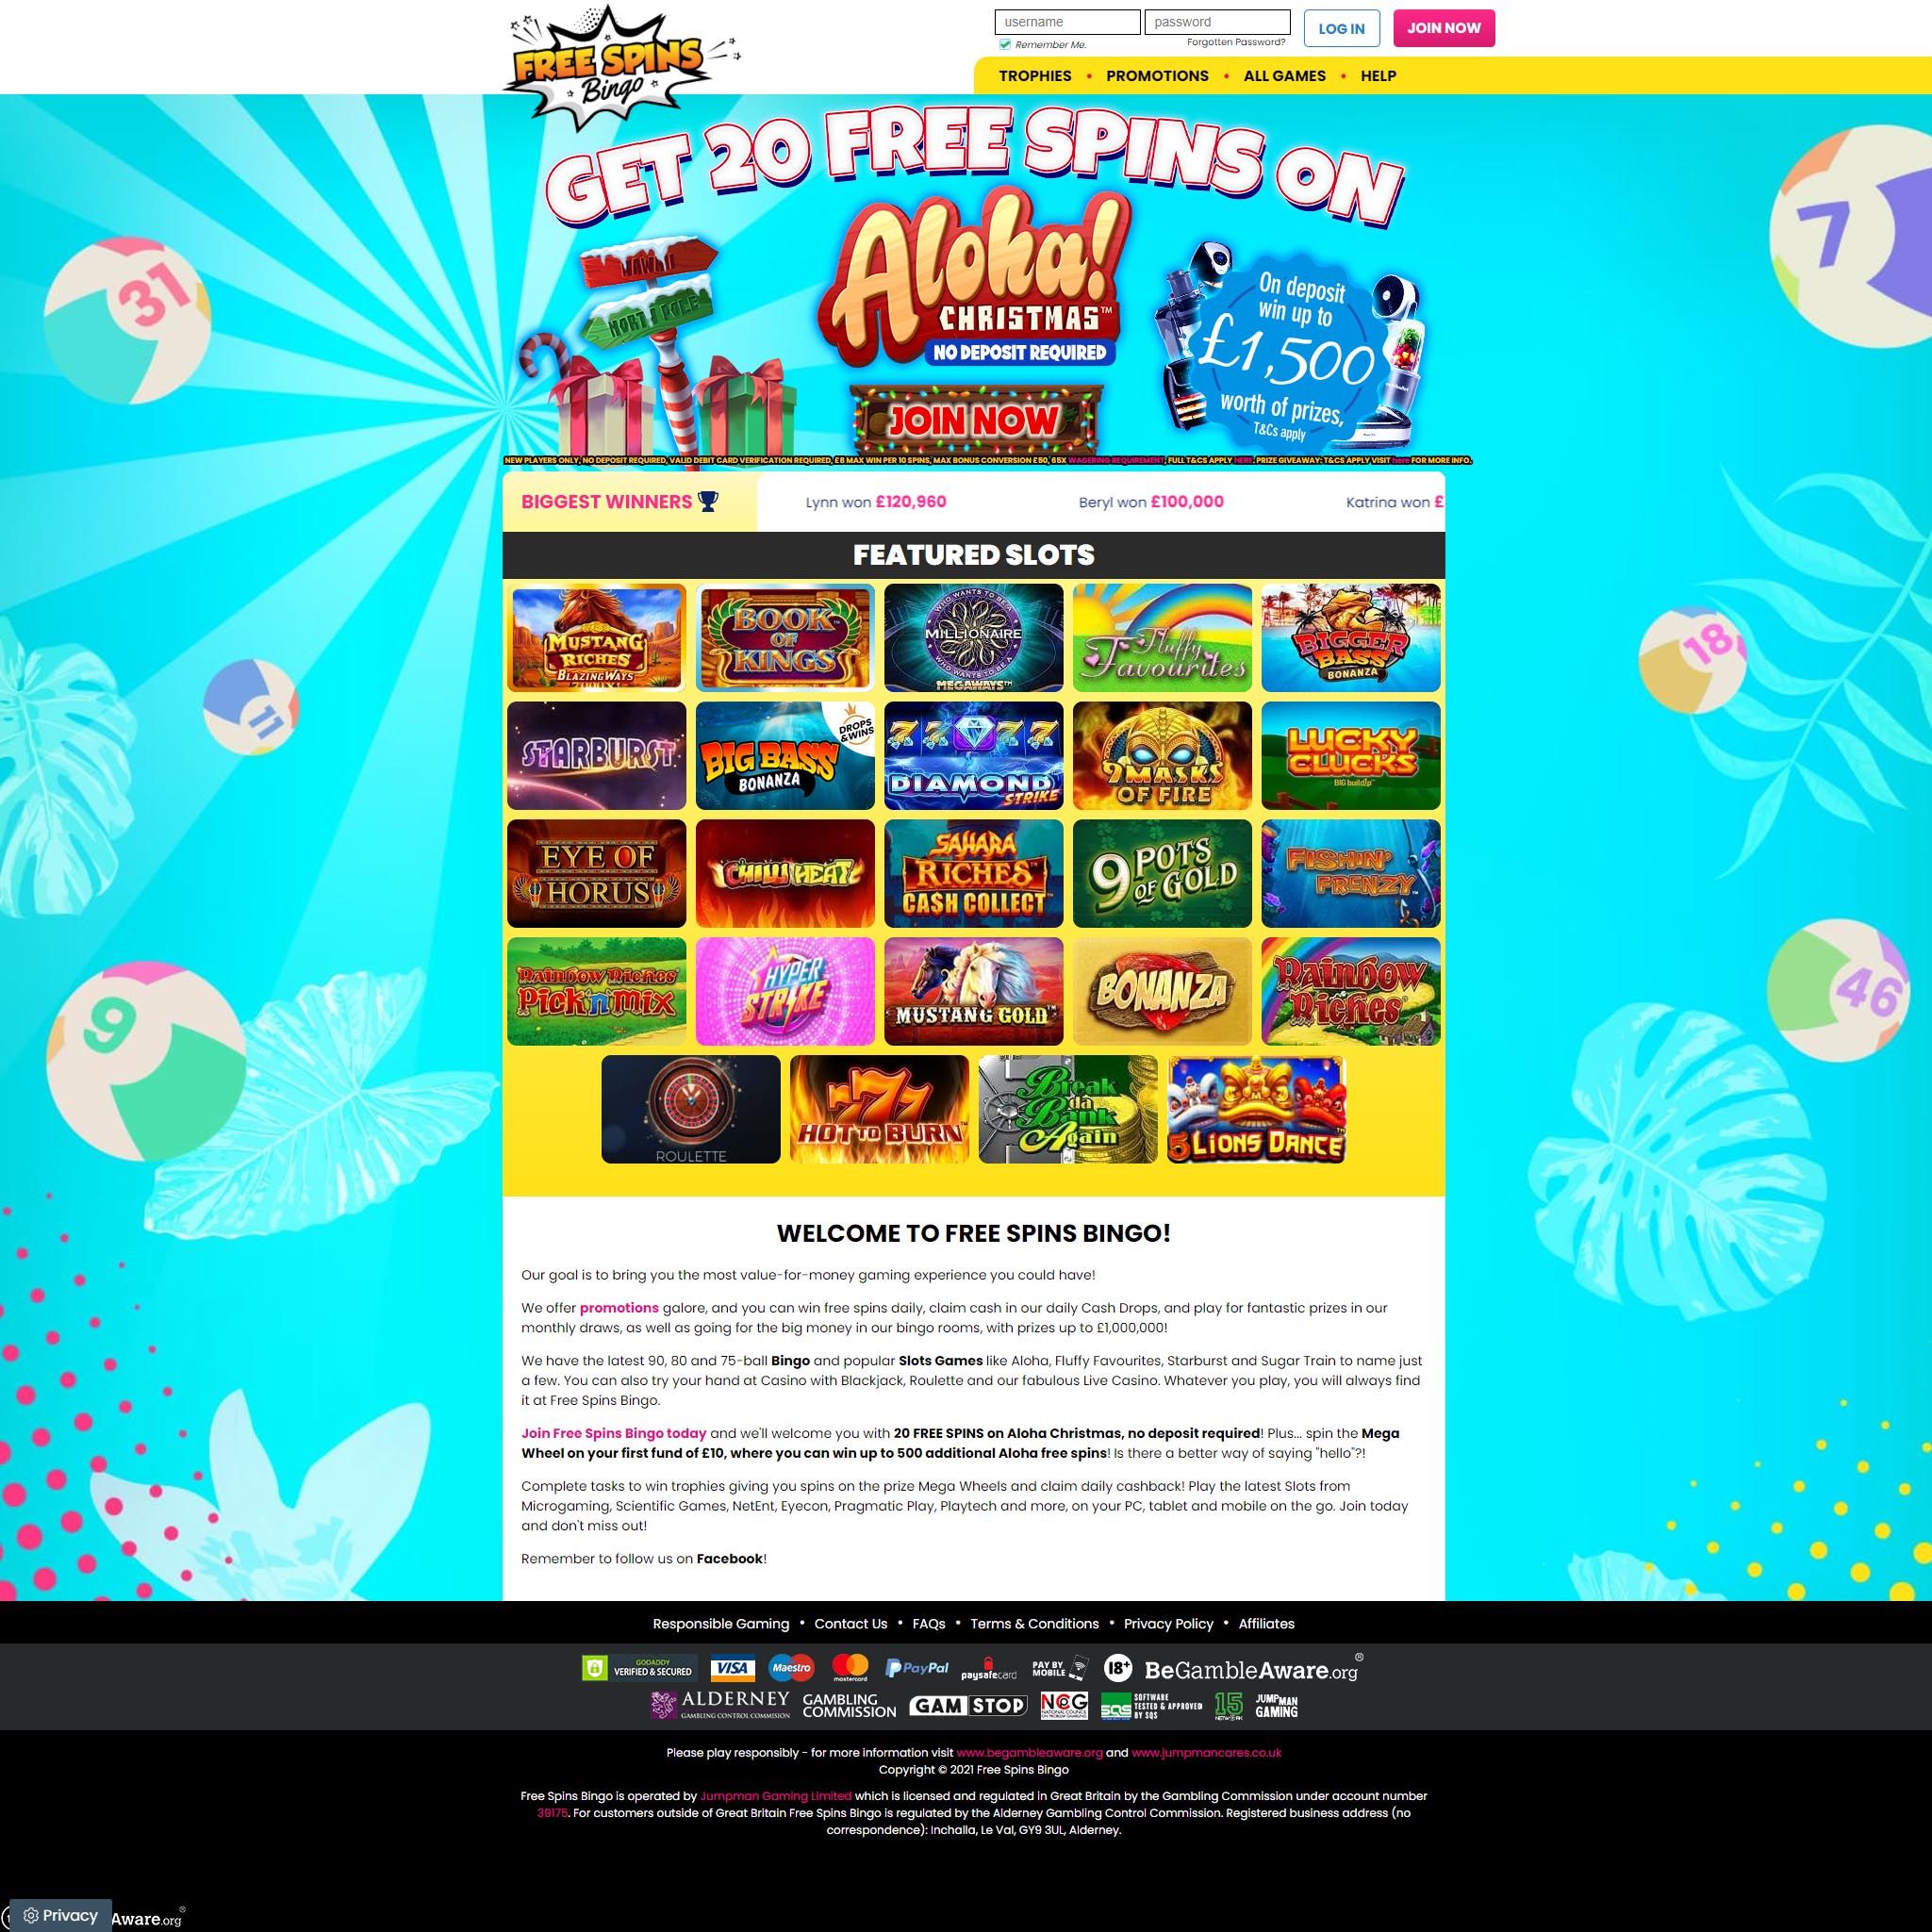 Free Spins Bingo review by Mr. Gamble